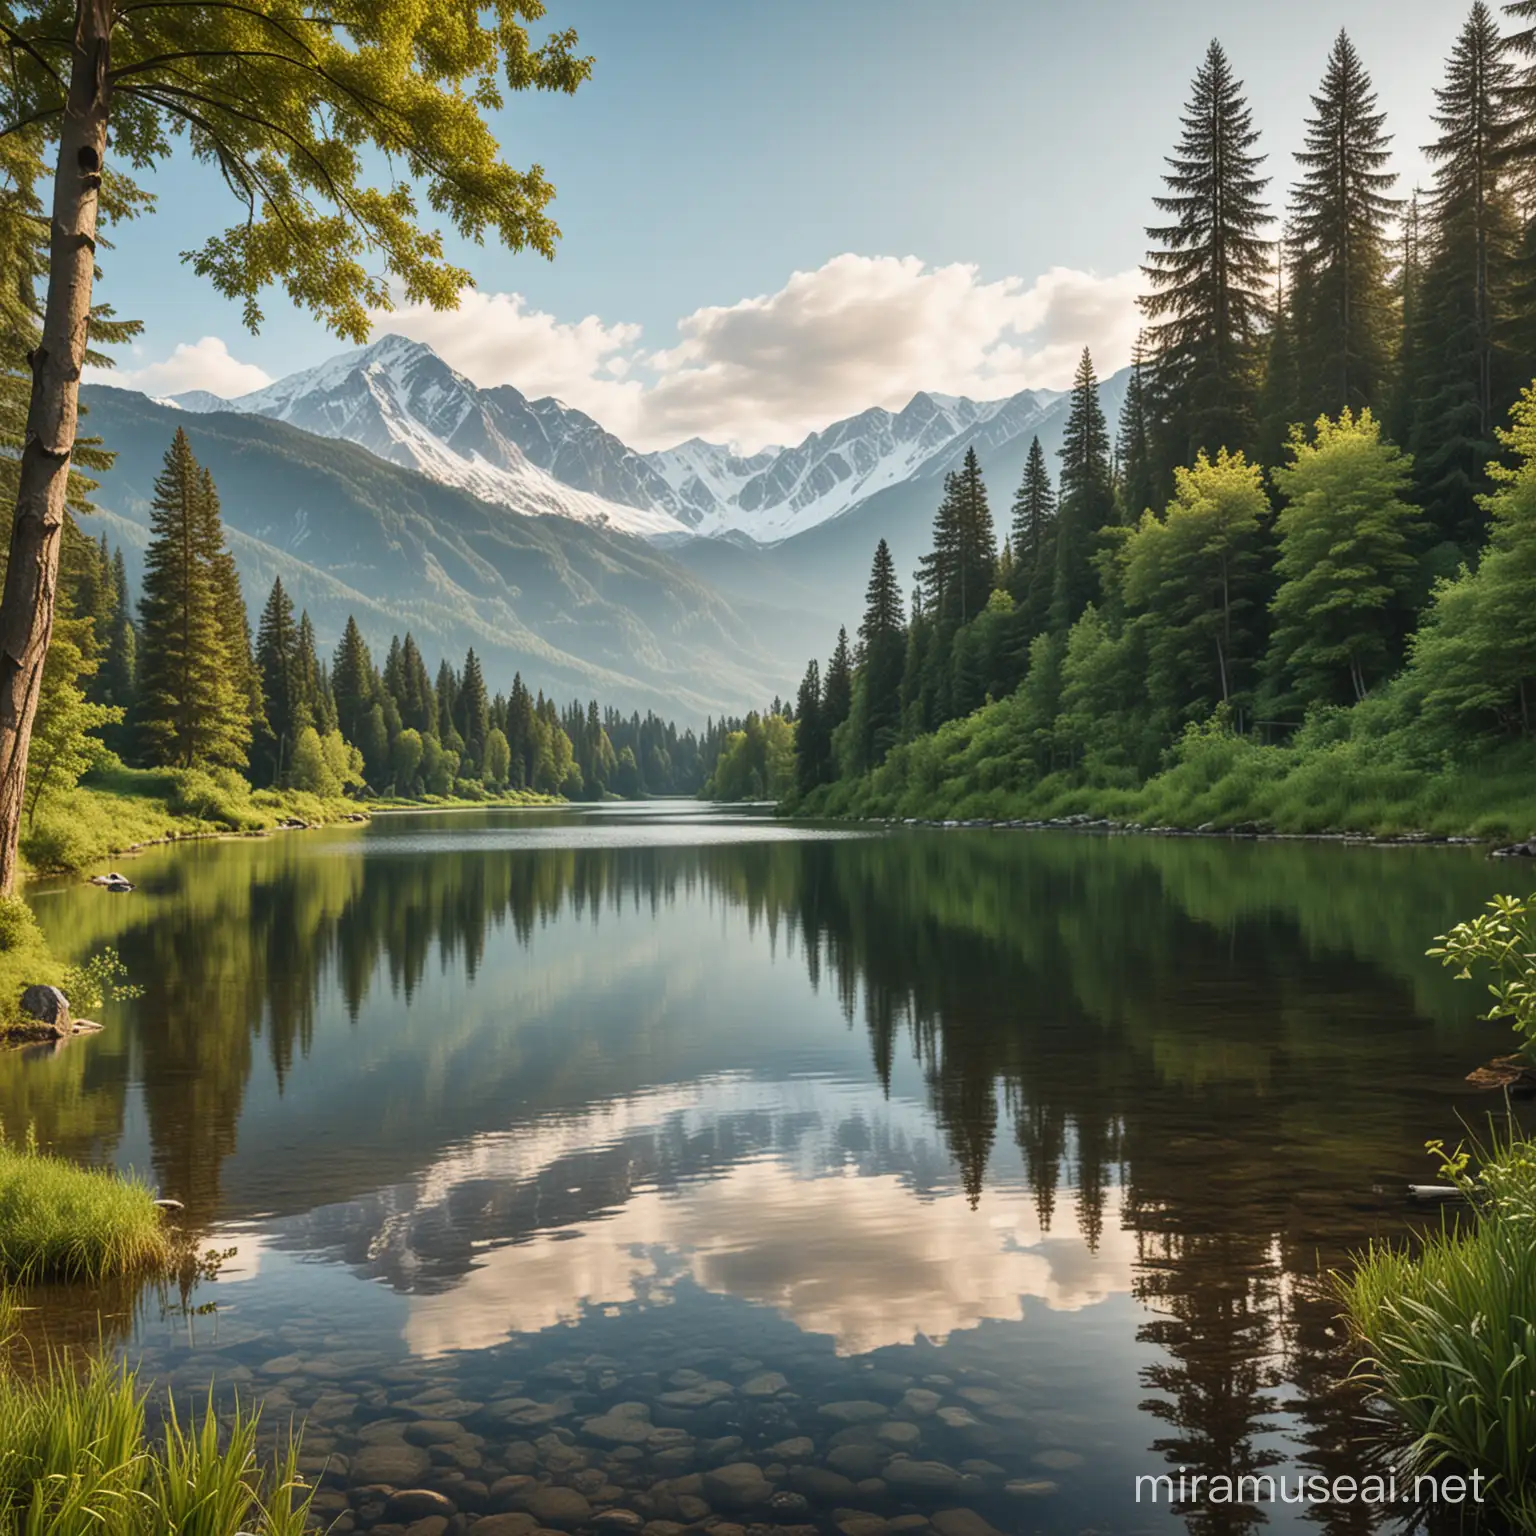 serene landscape with a tranquil lake surrounded by lush green trees and snow-capped mountains in the distance



